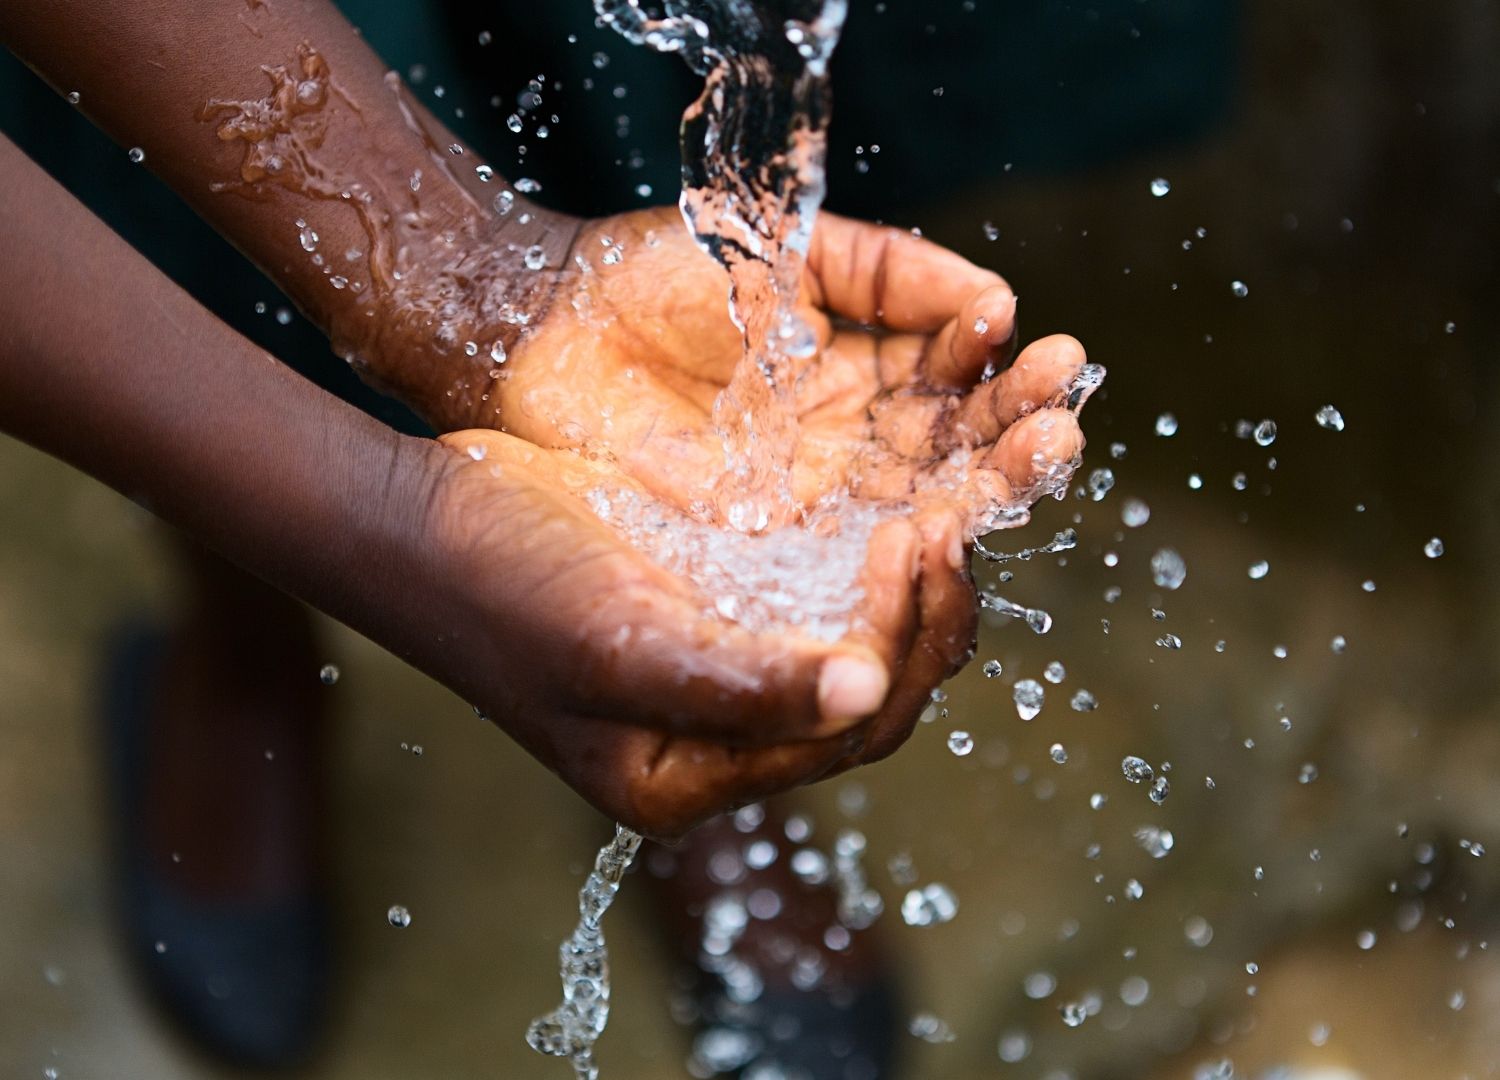 Developing Access to Clean Water in Africa